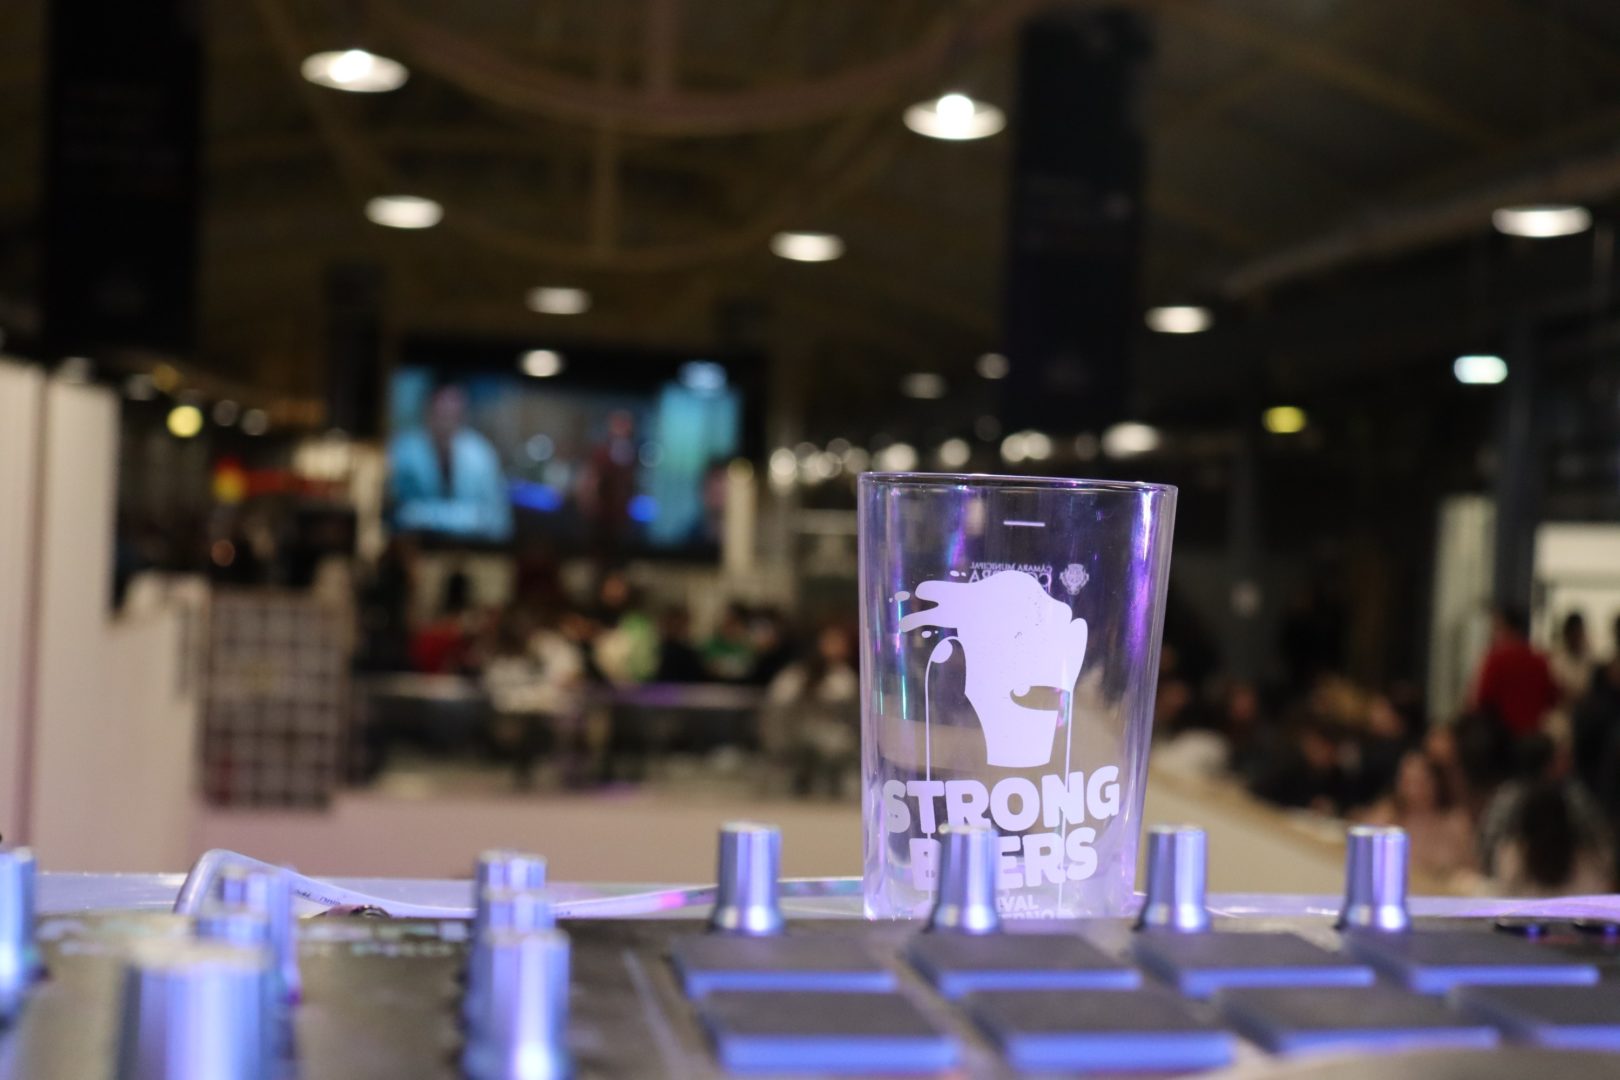 Strong Beers - Festival de Inverno